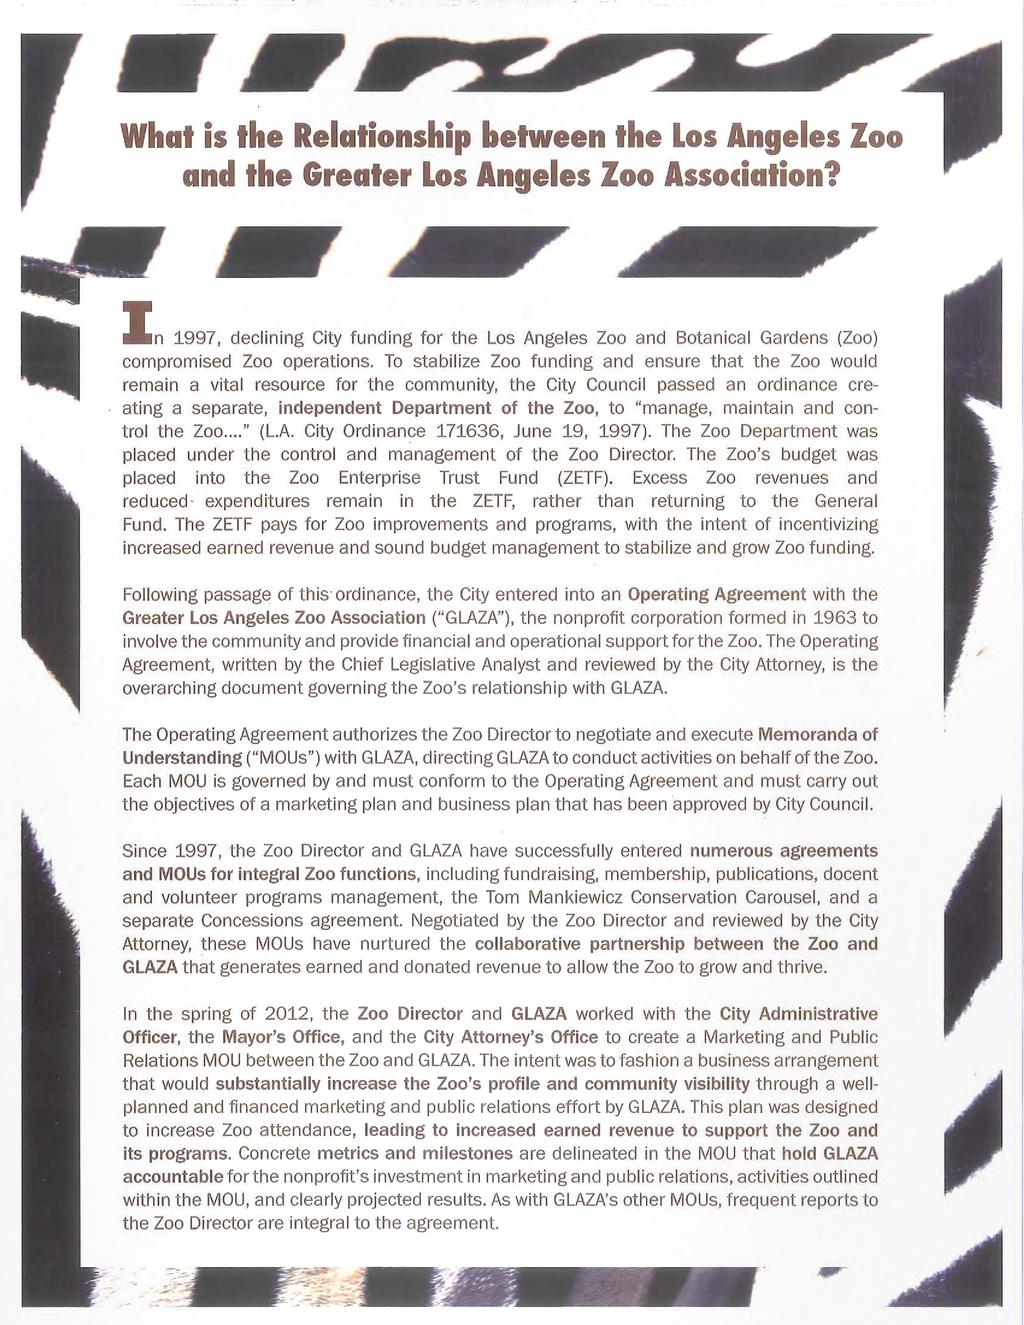 What is the Relationship between the LosAngeles Zoo and the Greater LosAngeles Zoo Association?